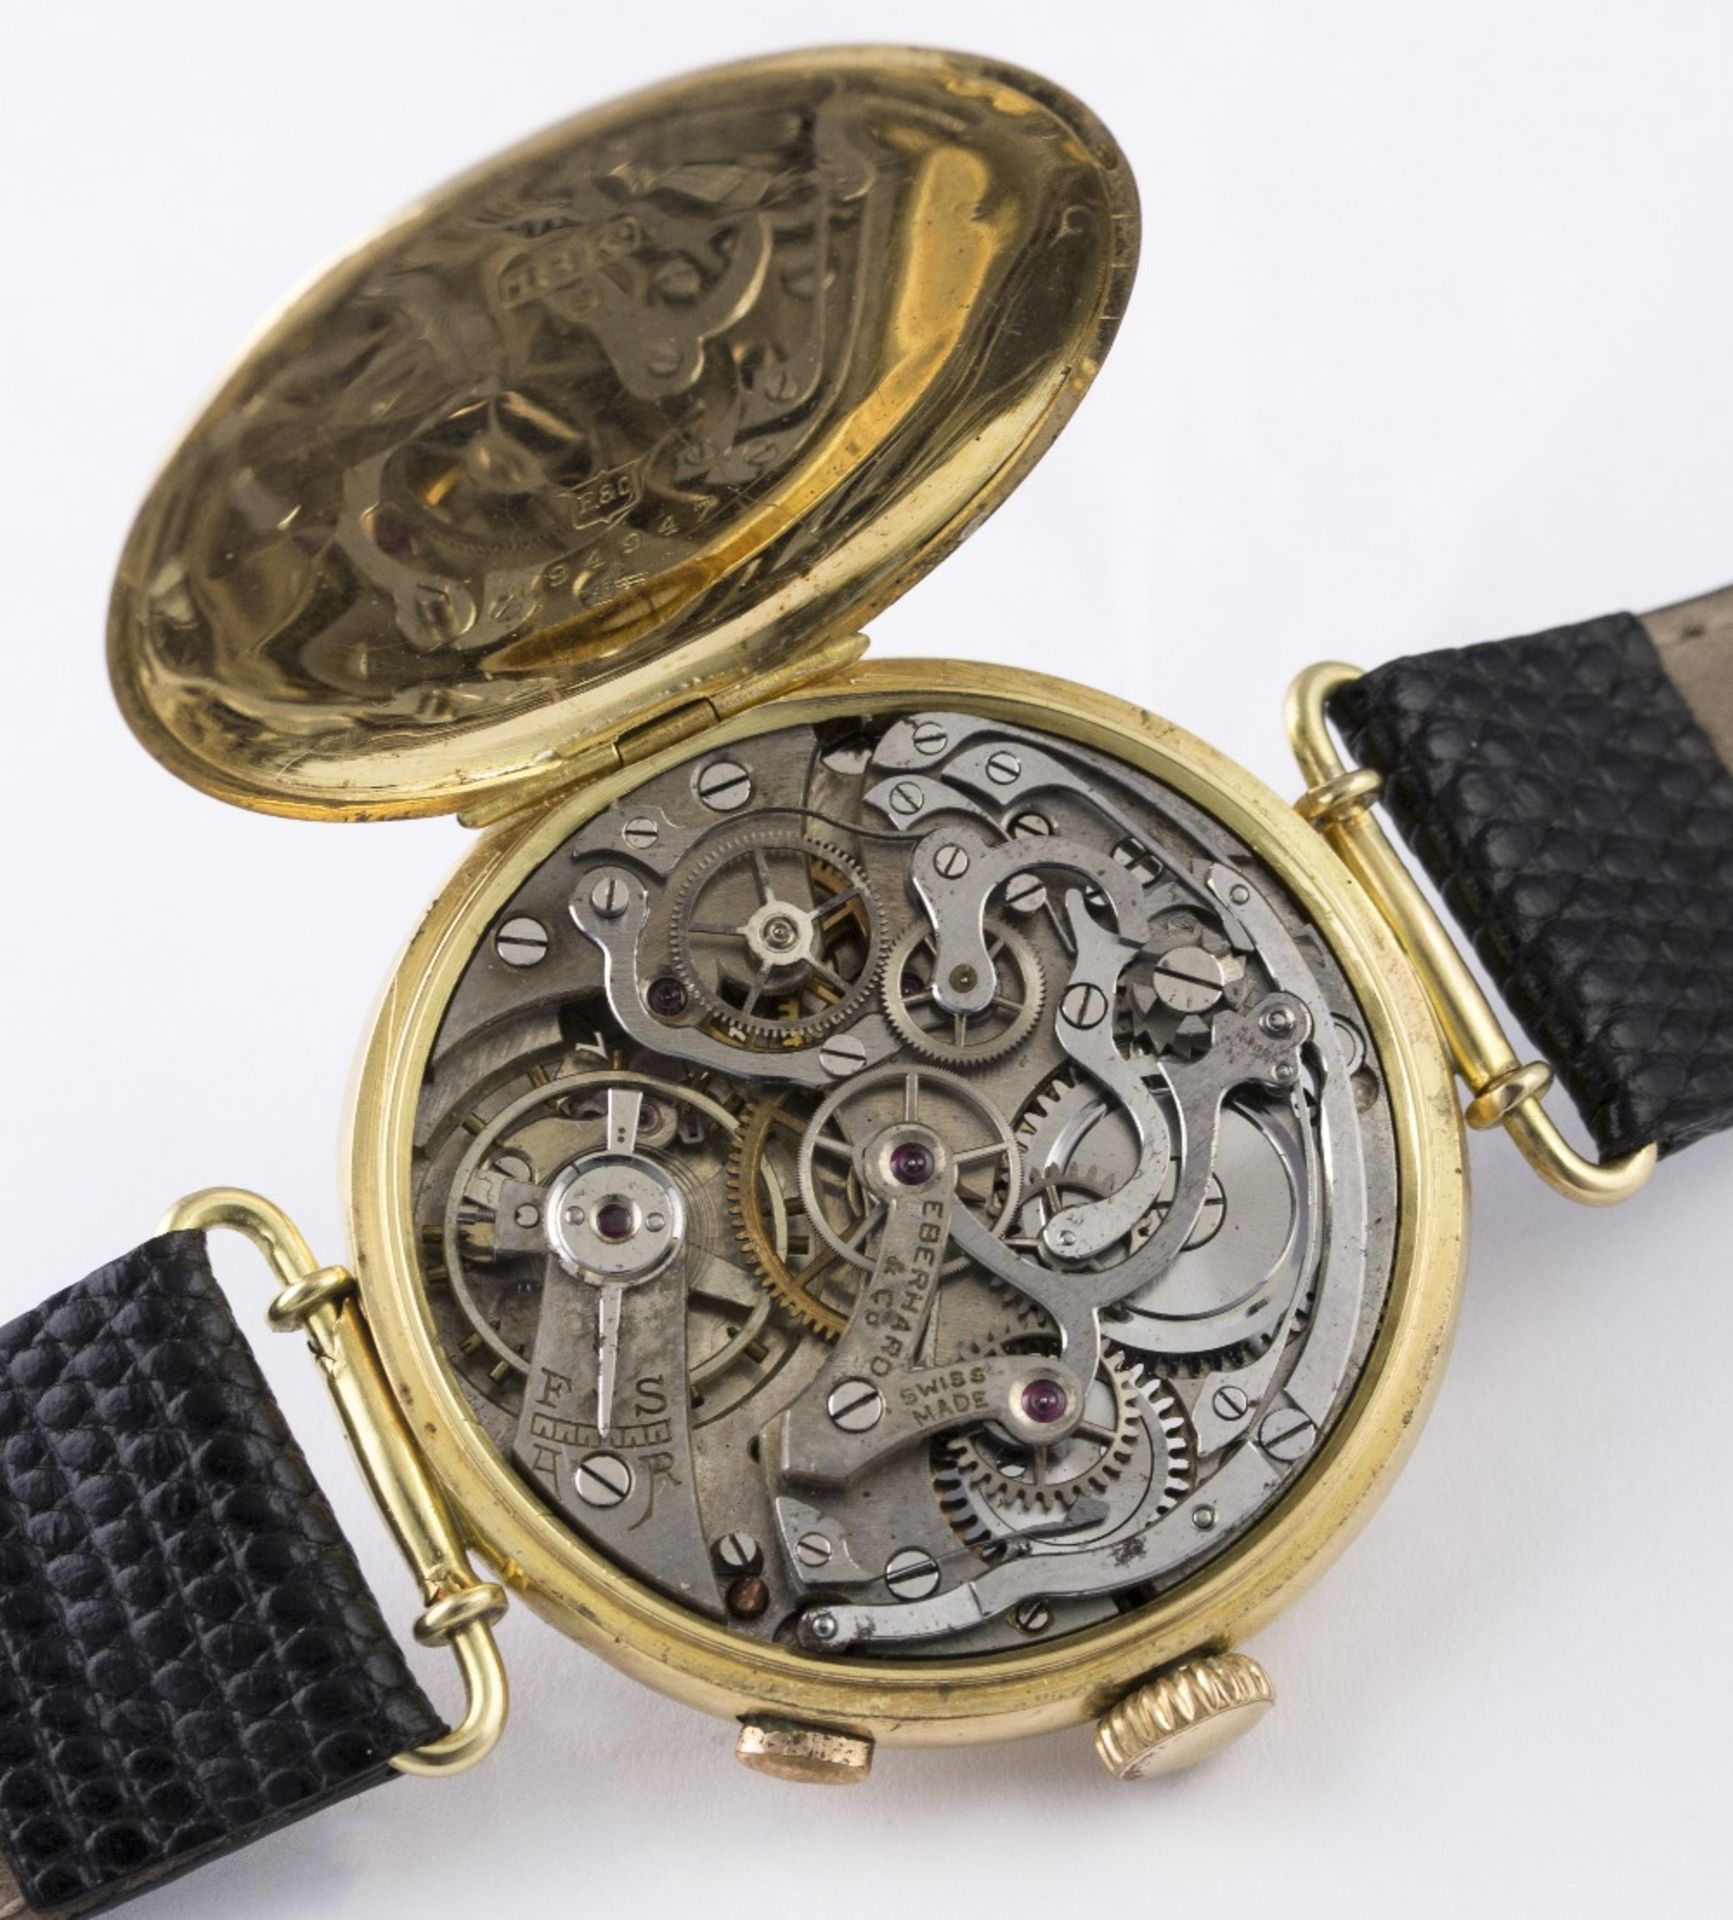 A GENTLEMAN'S 18K SOLID GOLD EBERHARD & CO SINGLE BUTTON CHRONOGRAPH WRIST WATCH CIRCA 1930s D: - Image 7 of 8